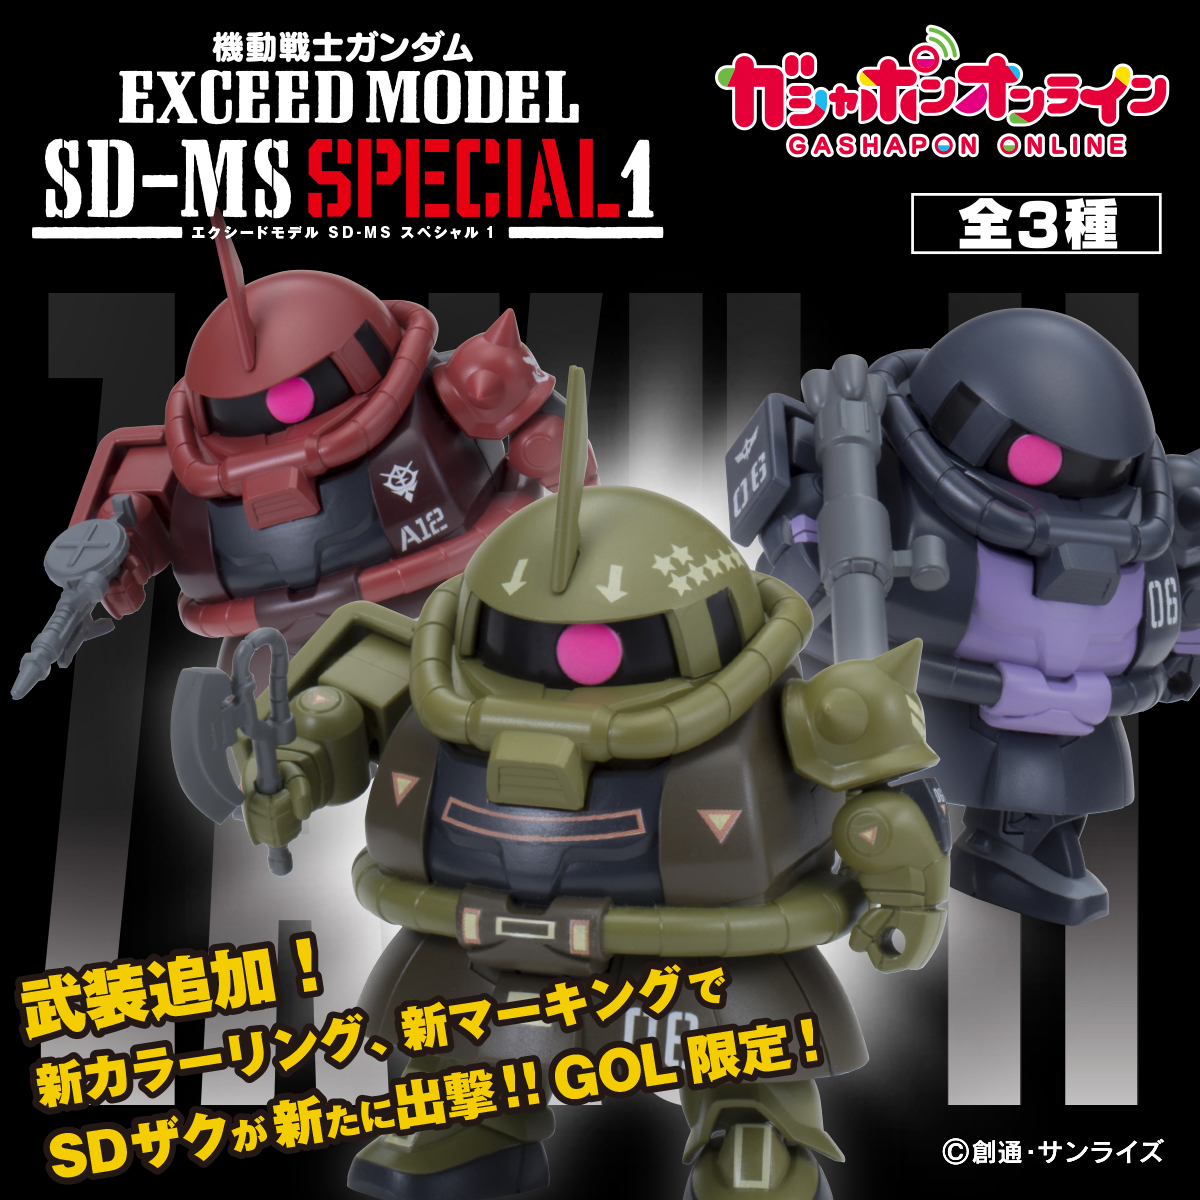 EXCEED MODEL SD-MSスペシャル１